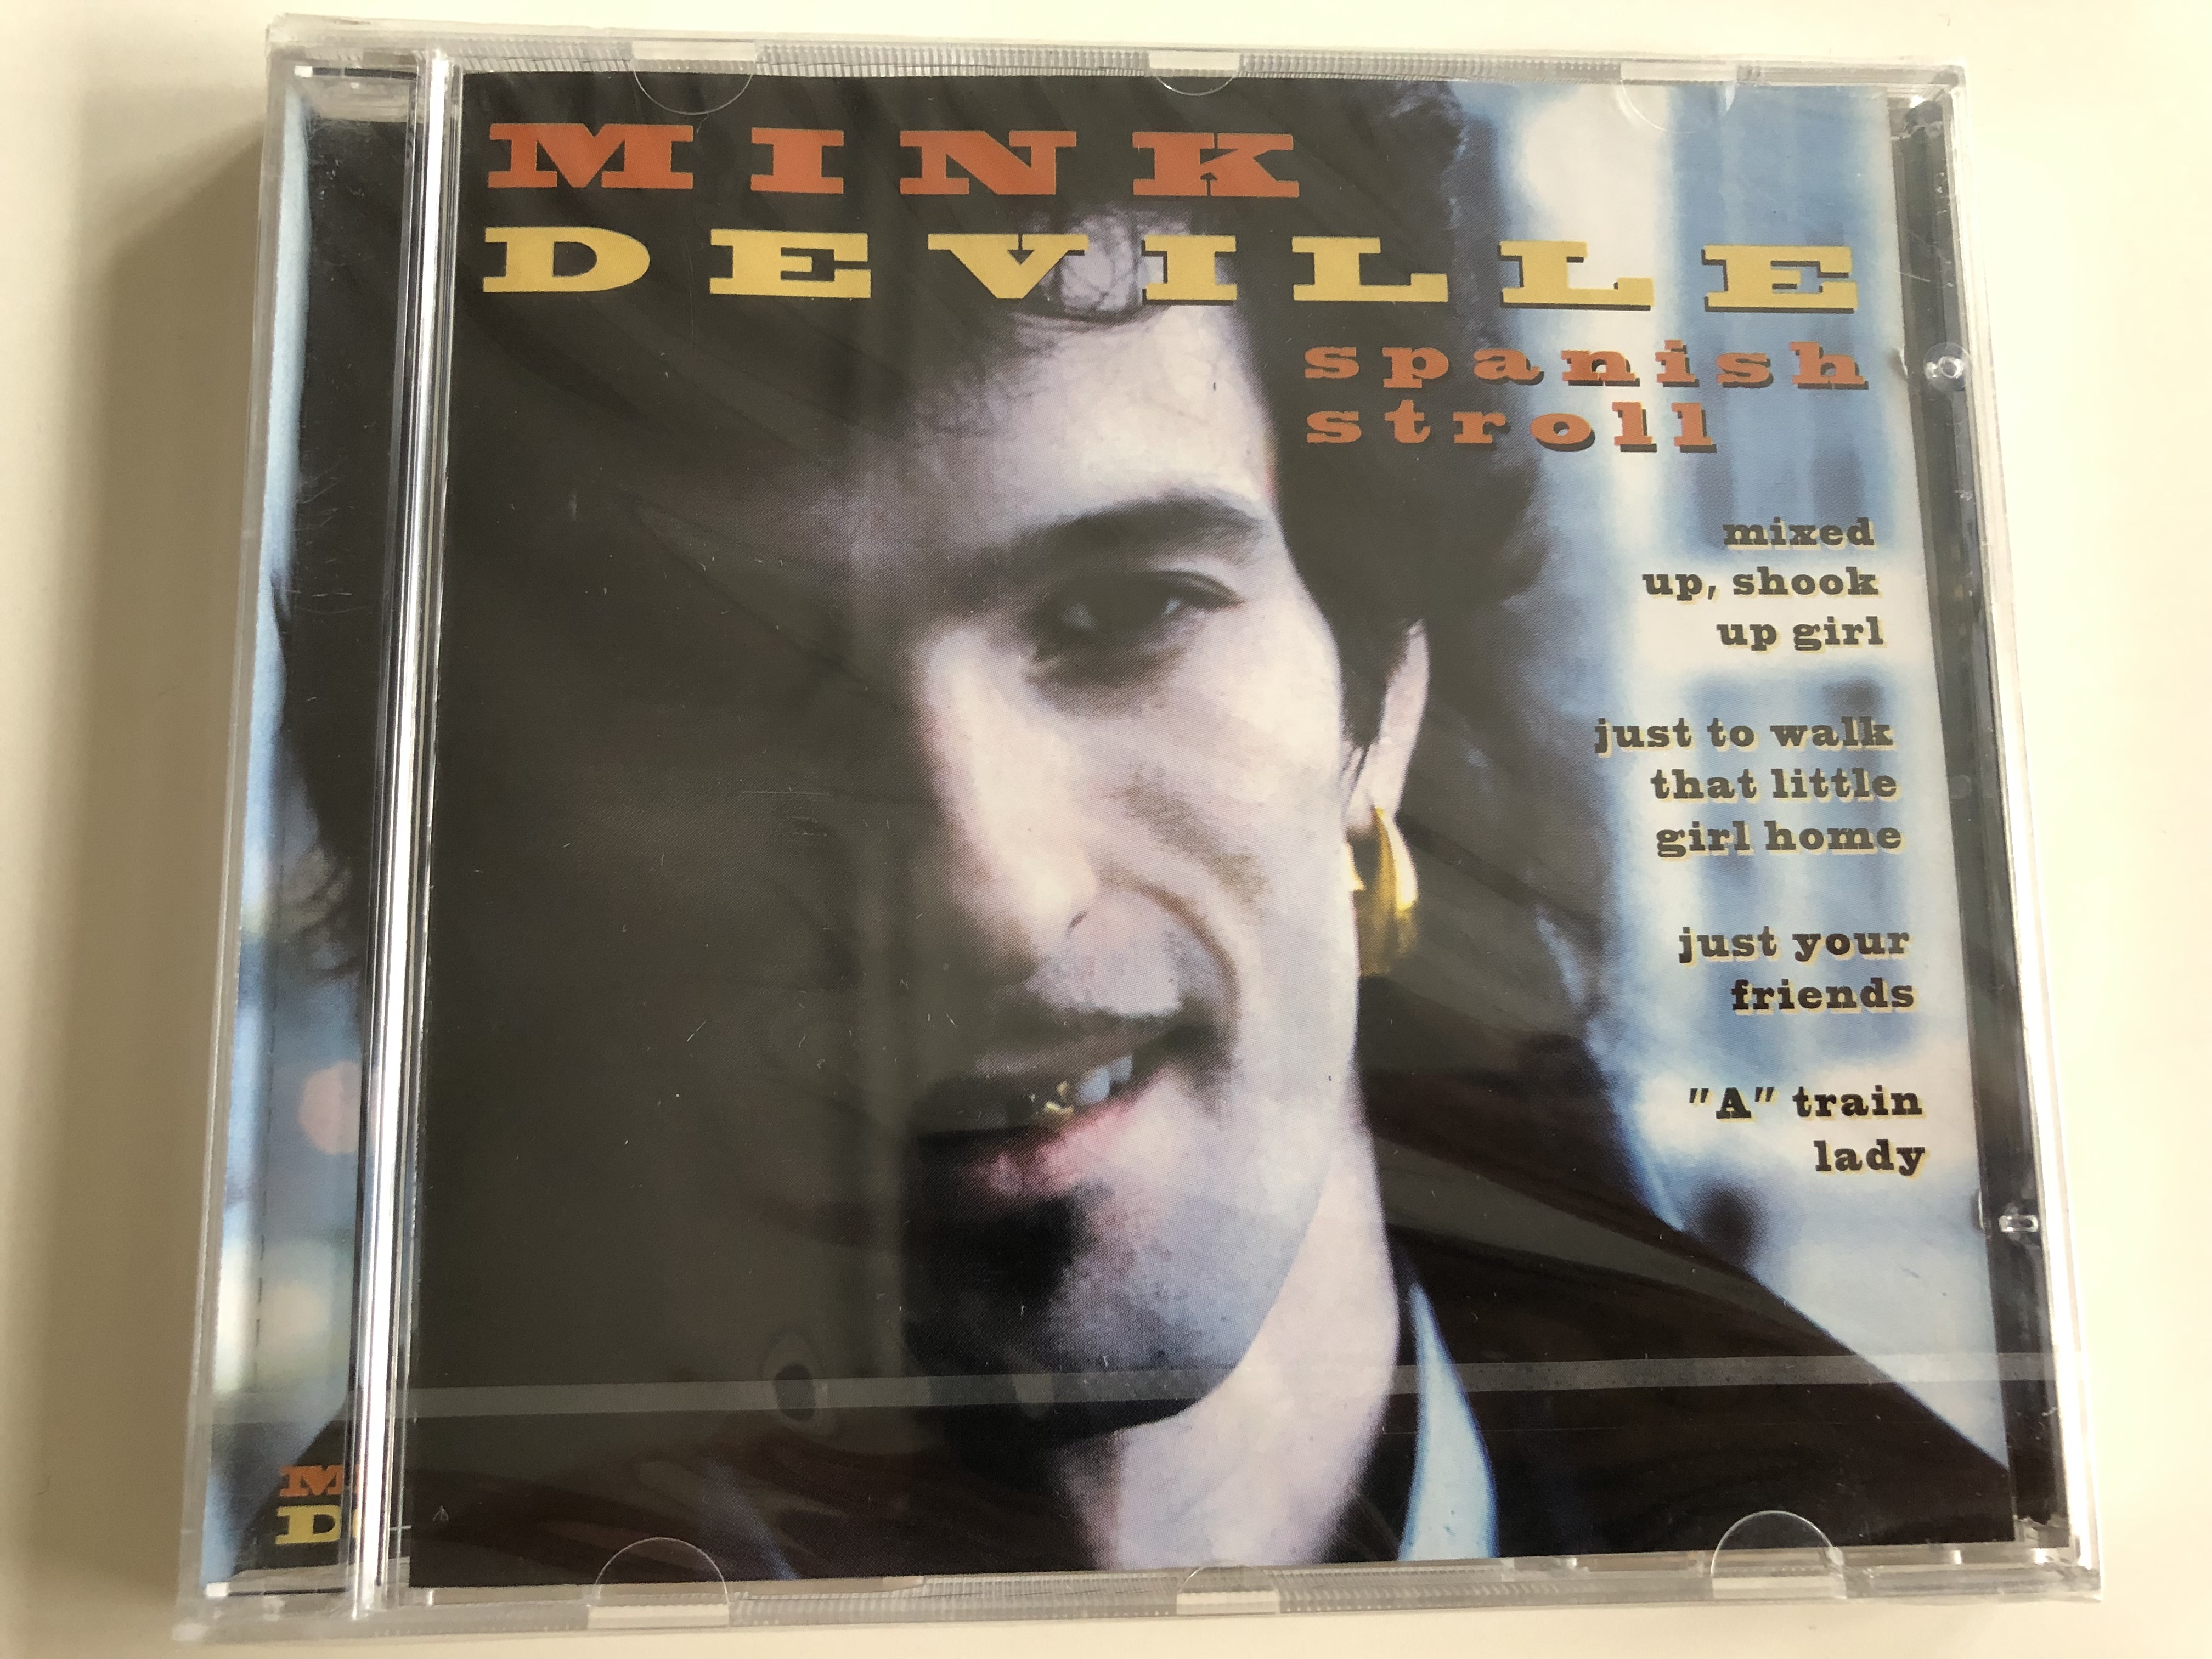 mink-deville-spanish-stroll-mixed-up-shook-up-girl-just-to-walk-that-little-girl-home-just-your-friends-a-train-lady-audio-cd-1996-dc-867352-disky-1-.jpg